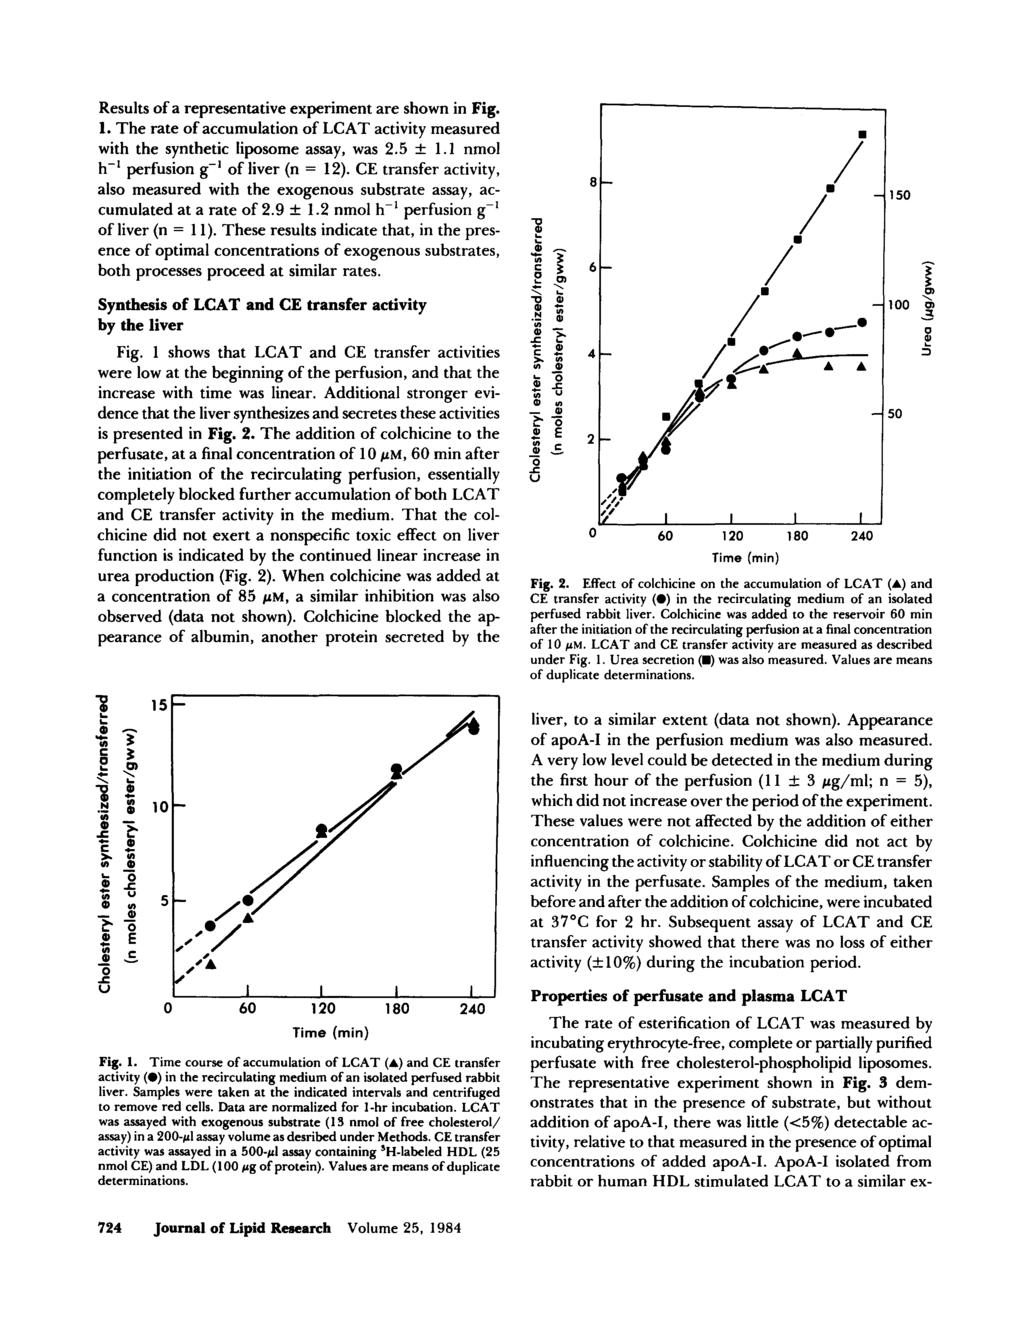 Results of a representative experiment are shown in Fig. 1. The rate of accumulation of LCAT activity measured with the synthetic liposome assay, was 2.5 f 1.